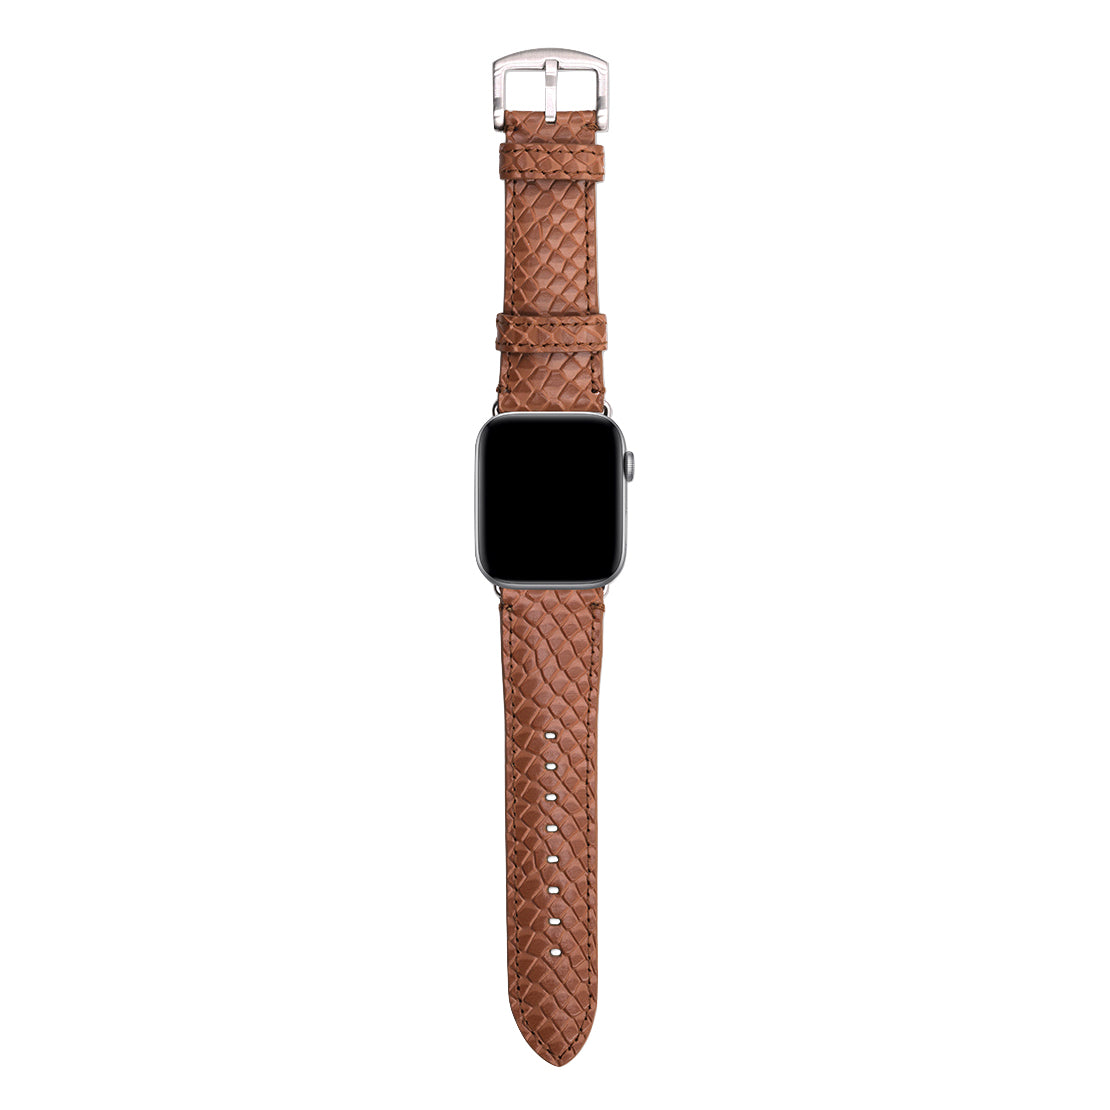 Genuine Leather Pearl Pattern Handcrafted Apple Watch Band-Watch Band- phone case - phone cases- phone cover- iphone cover- iphone case- iphone cases- leather case- leather cases- DIYCASE - custom case - leather cover - hand strap case - croco pattern case - snake pattern case - carbon fiber phone case - phone case brand - unique phone case - high quality - phone case brand - protective case - buy phone case hong kong - online buy phone case - iphone‎手機殼 - 客製化手機殼 - samsung ‎手機殼 - 香港手機殼 - 買電話殼